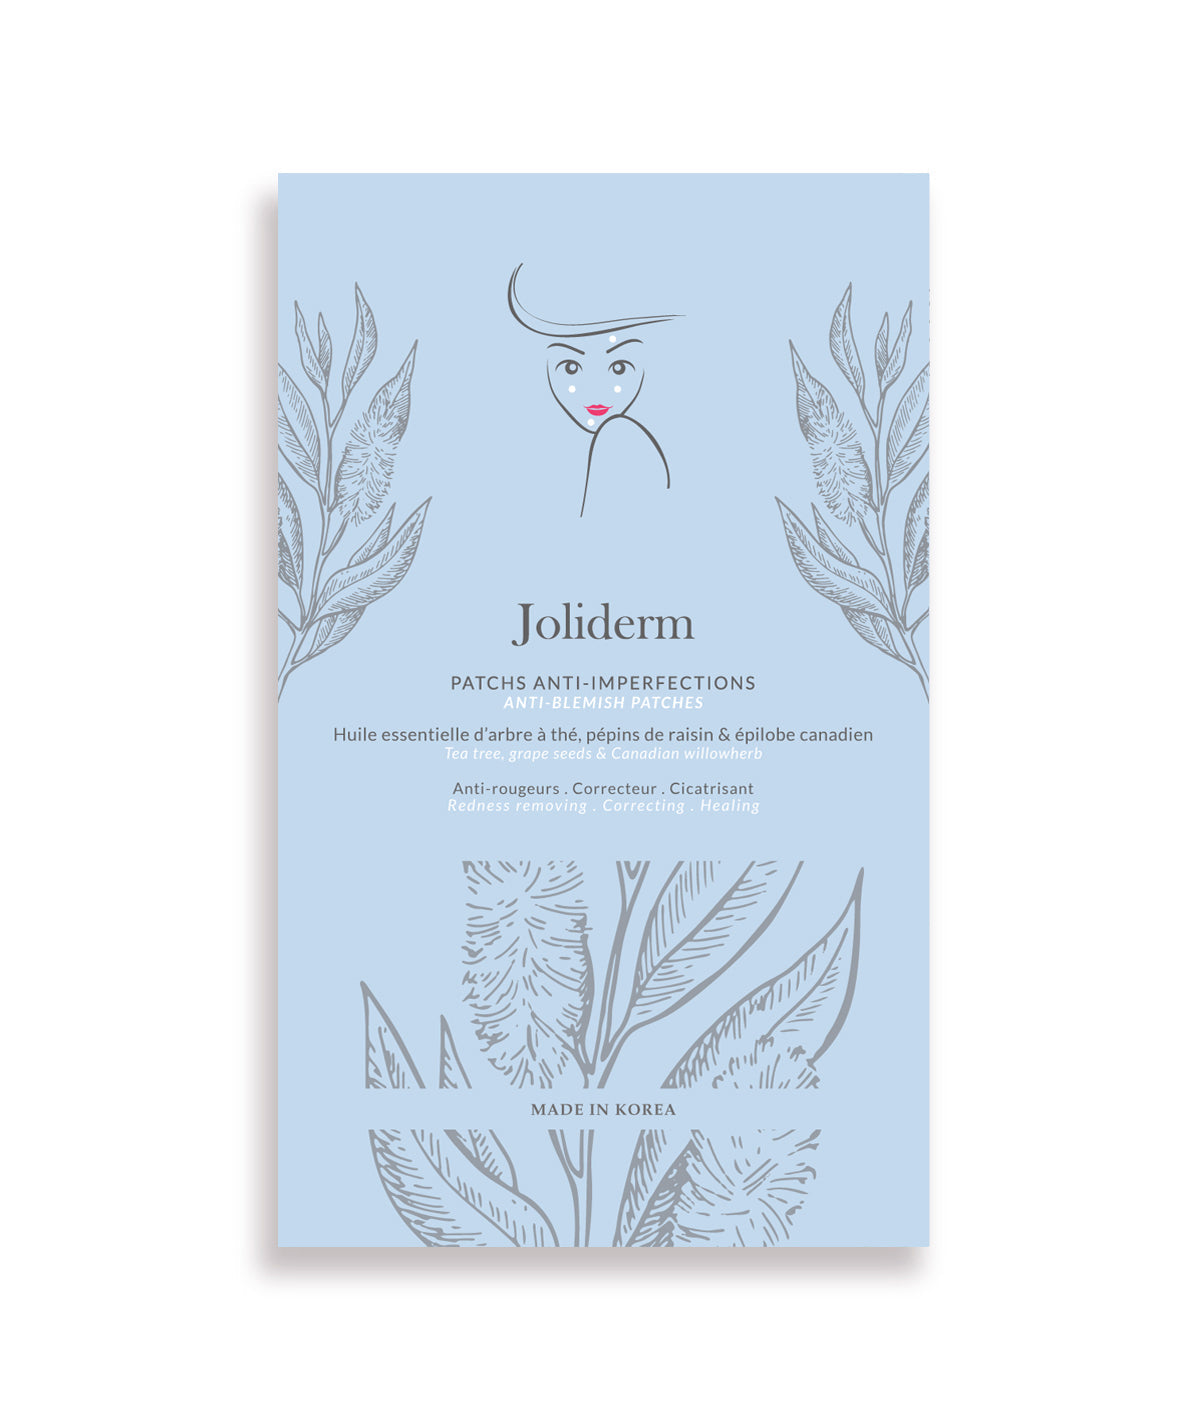 Patchs anti-imperfections Joliderm